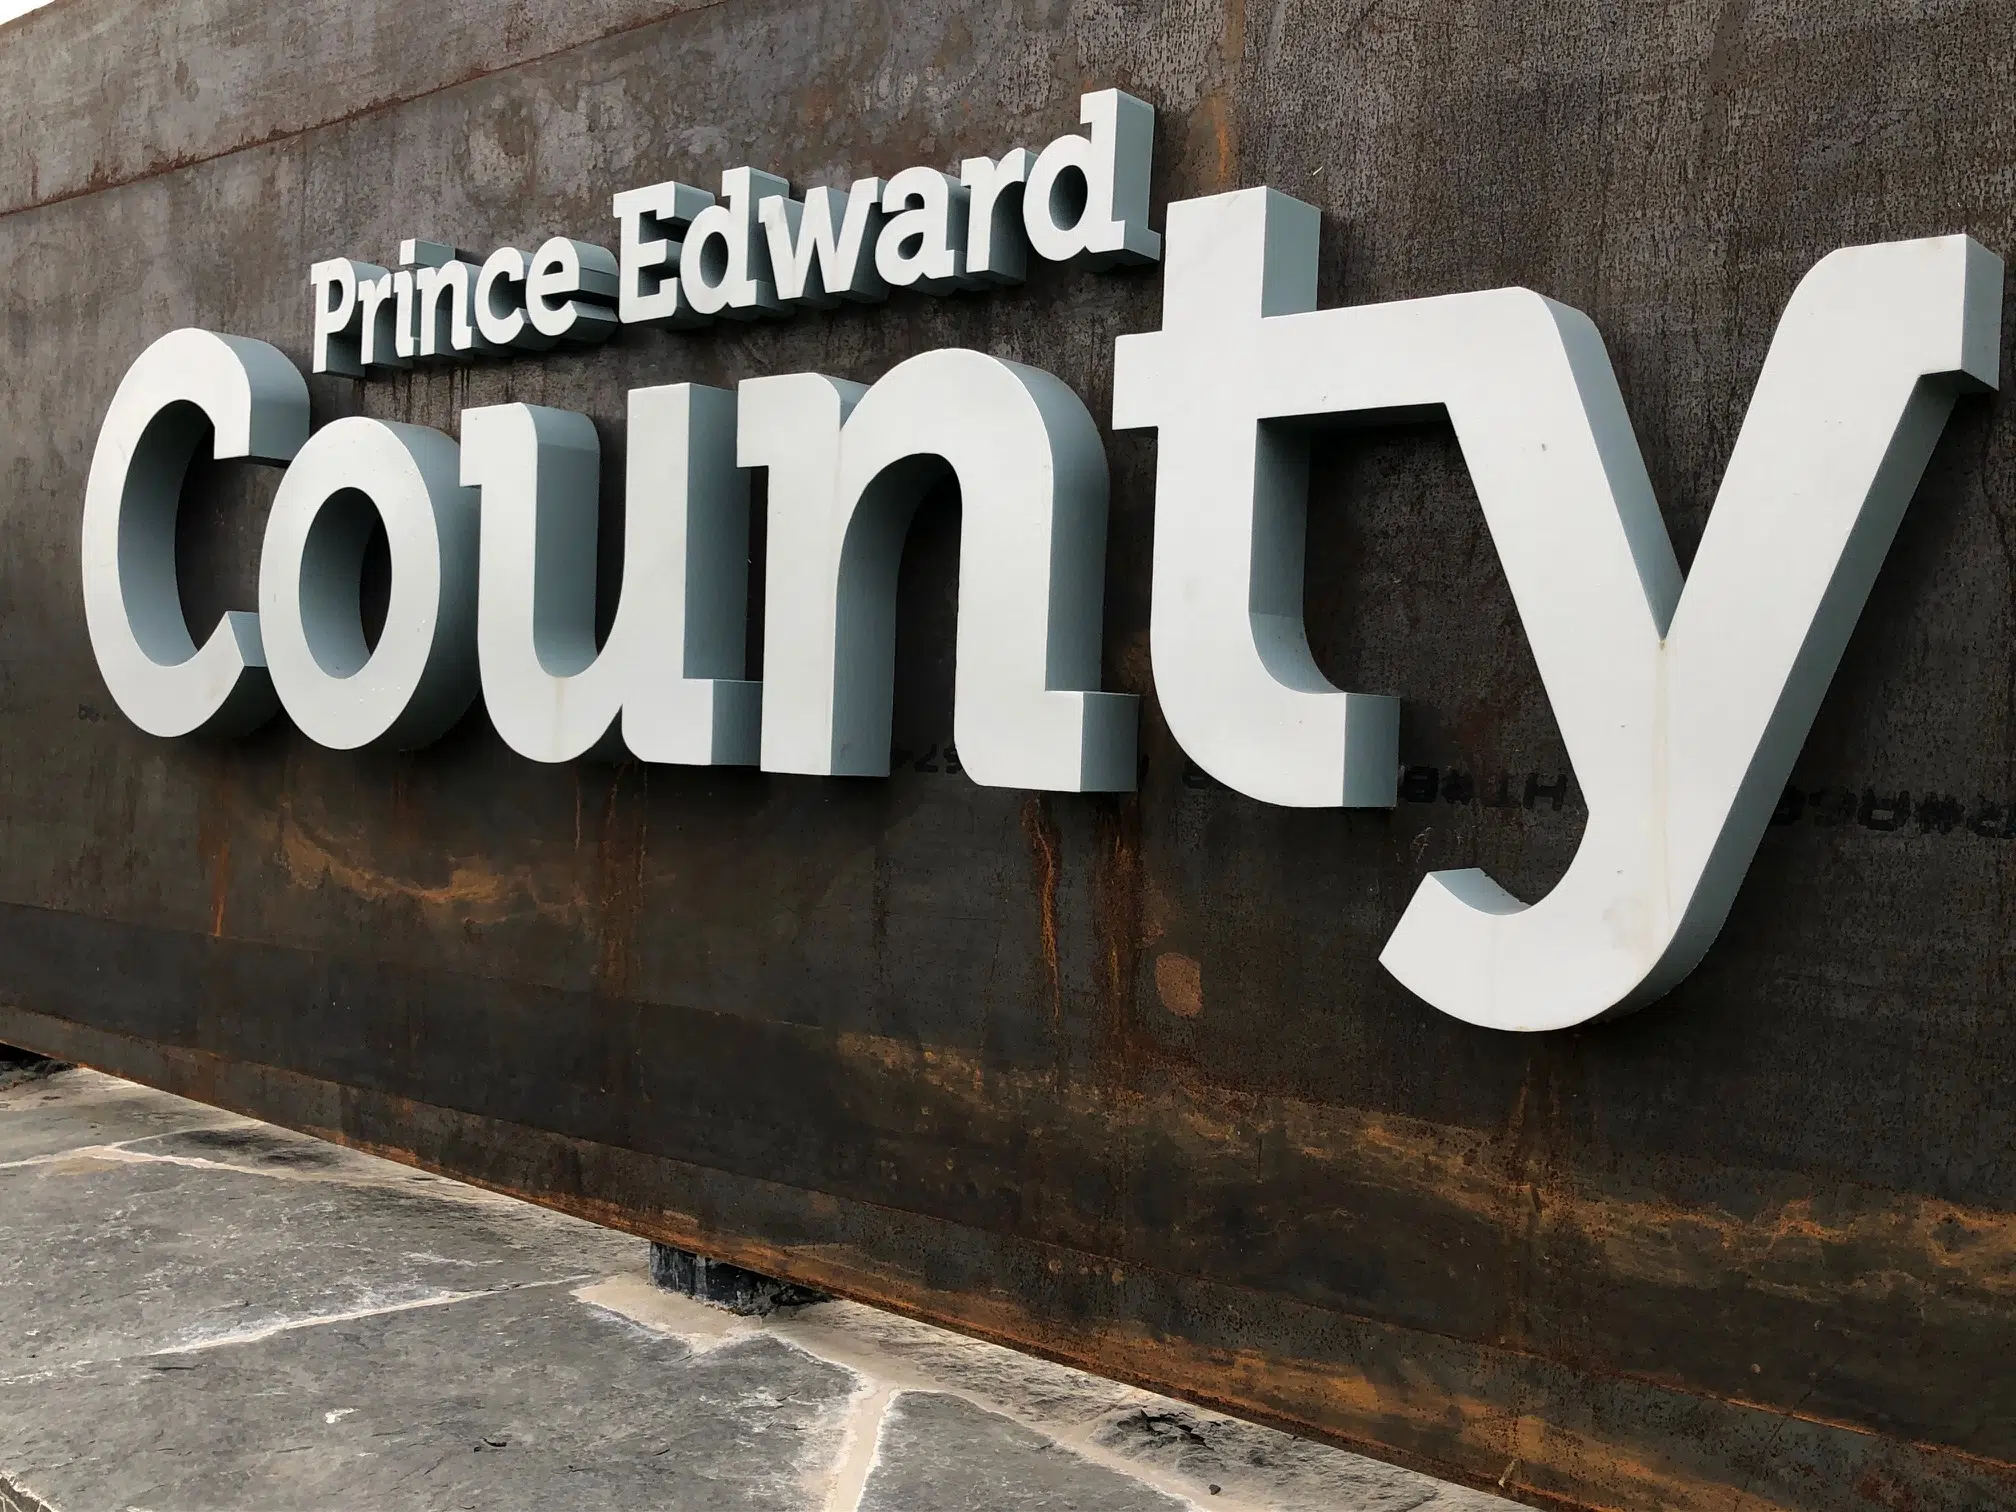 Prince Edward County approves Taxi Support Grant program